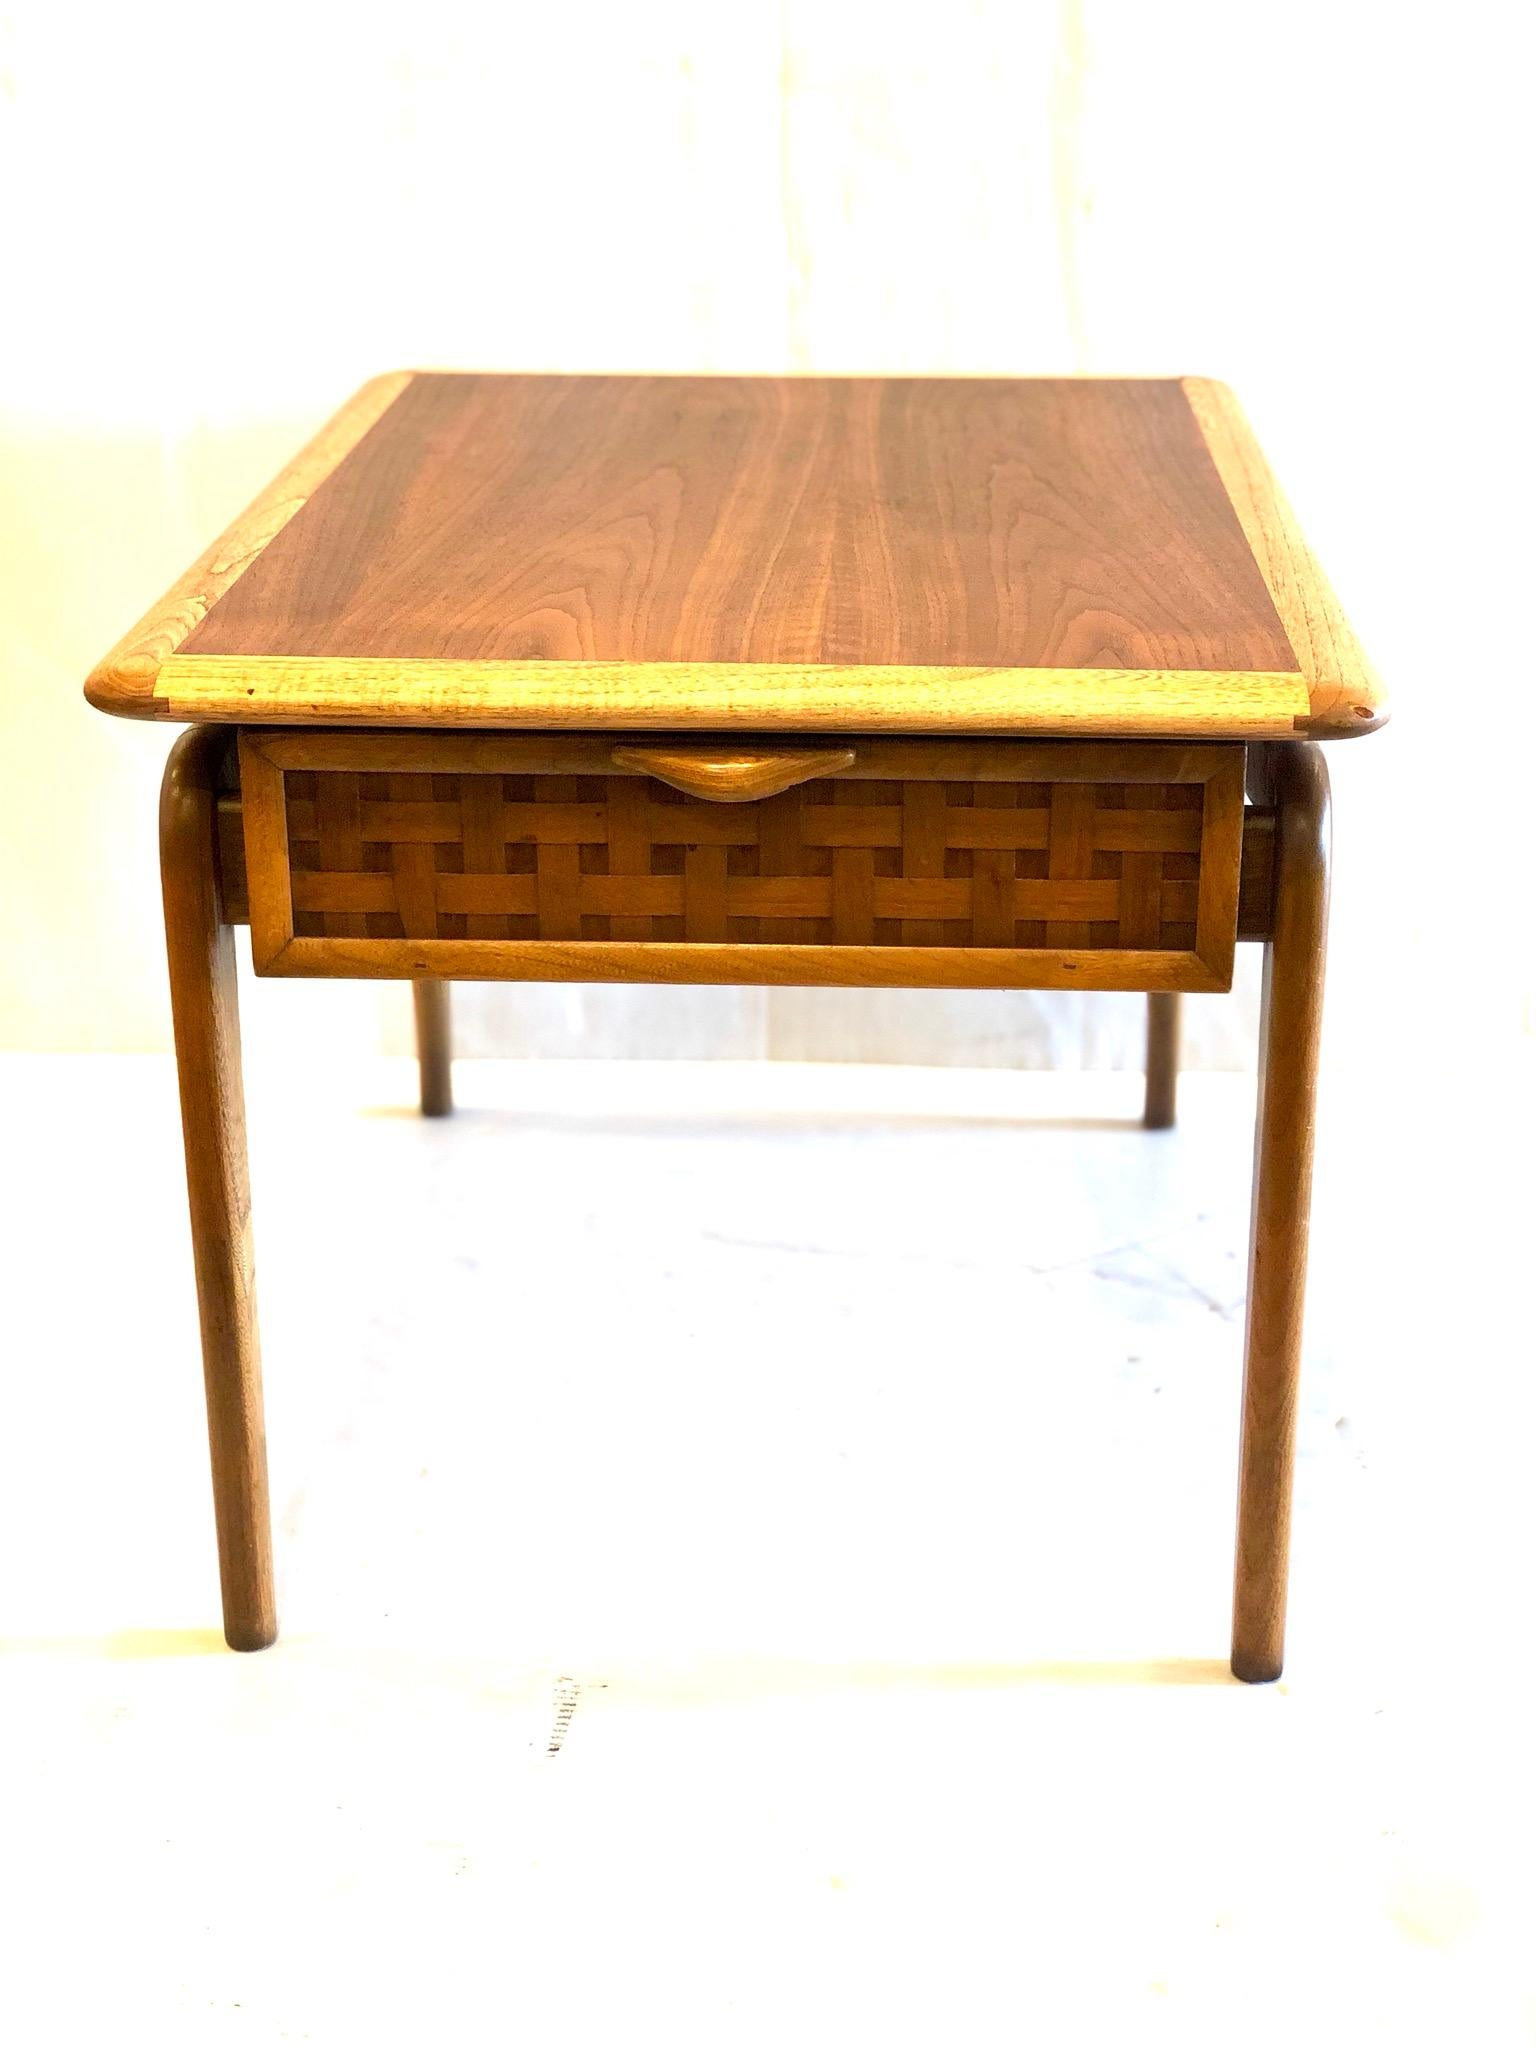 Beautiful craftsmanship on this 1950s, American modern walnut inlaid end table, with brass balls side accents, and beech wood combination, with drawer, the table is in great condition, totally refinished. Great between two club chairs or can be used